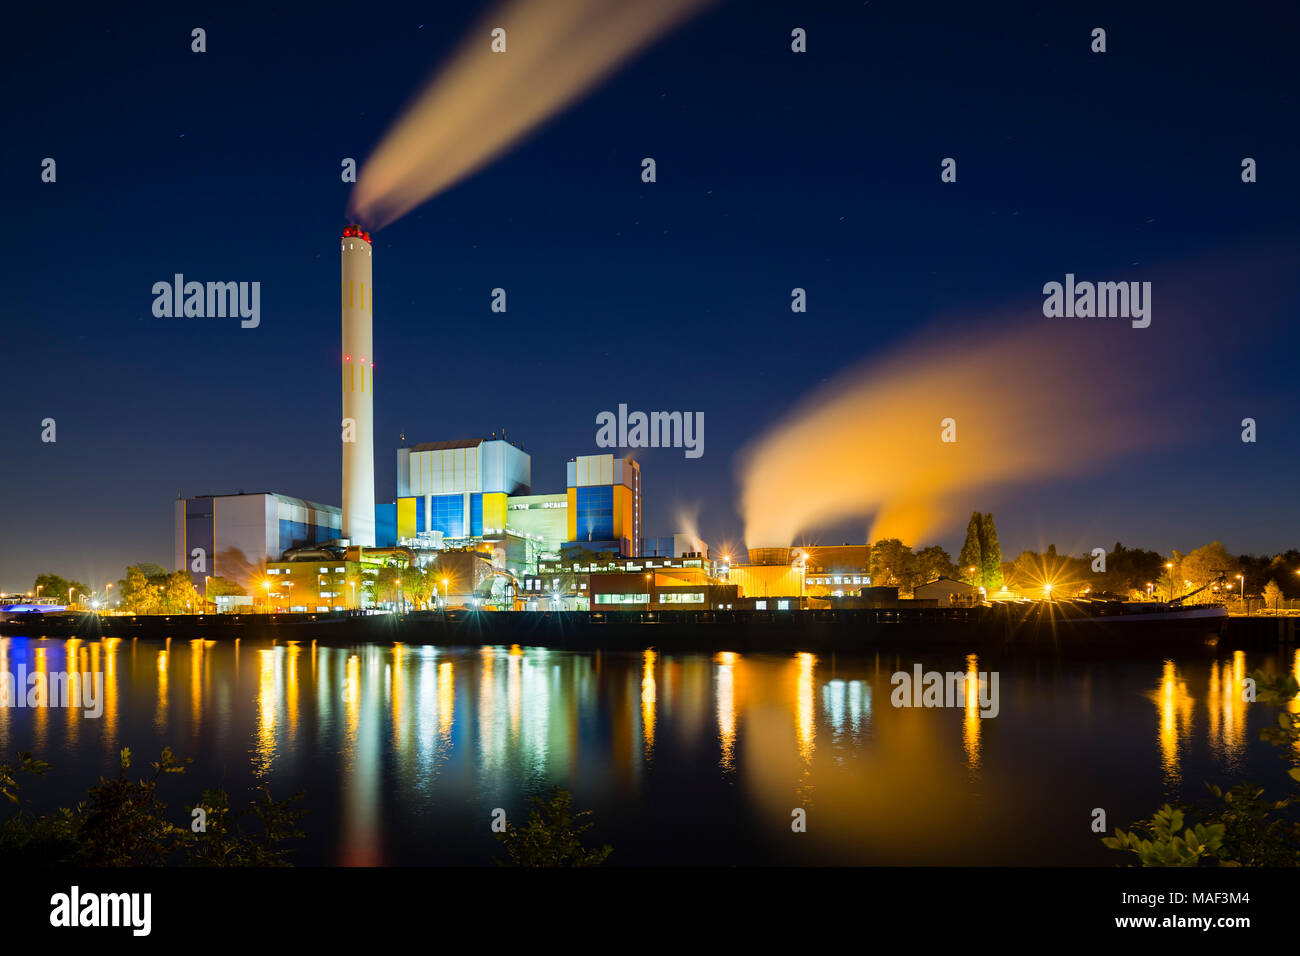 Colorful night shot of an illuminated modern industrial building with steam and deep blue sky behind a canal. Stock Photo